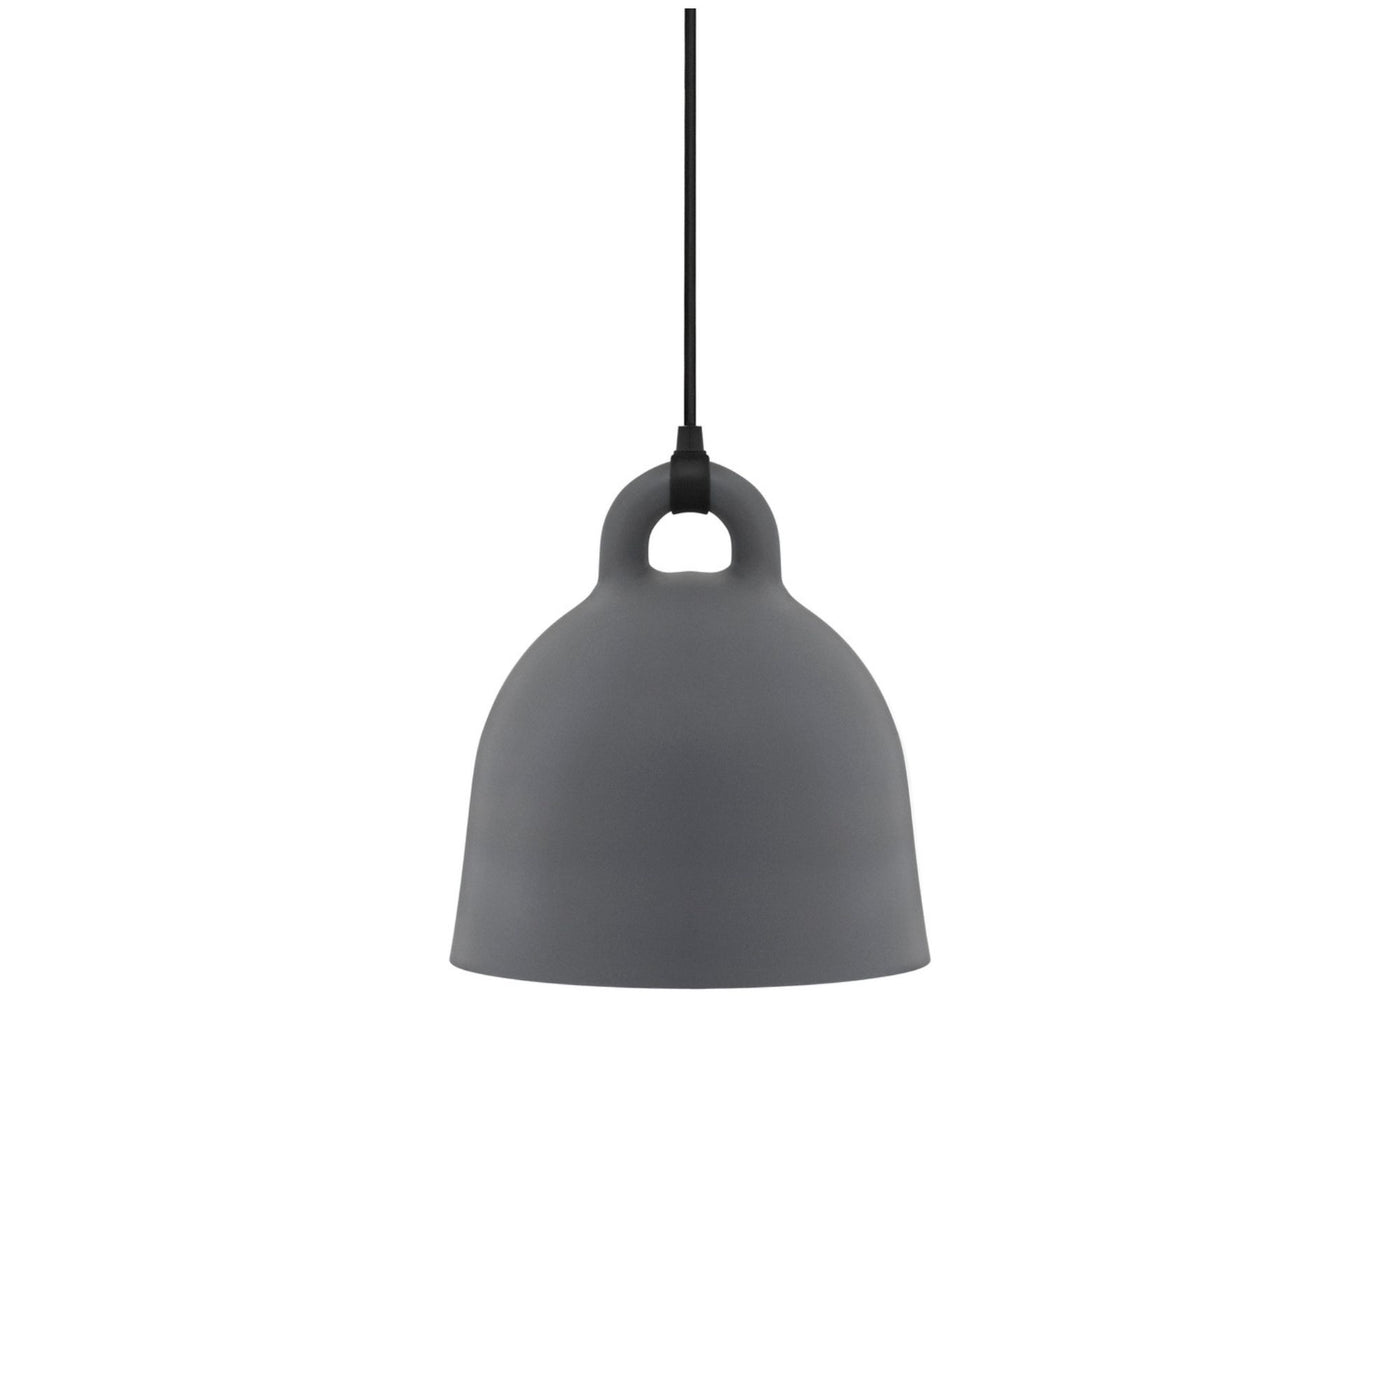 Norman Copenhagen Bell Pendant Lamp in grey. Free UK delivery from someday designs #size_small